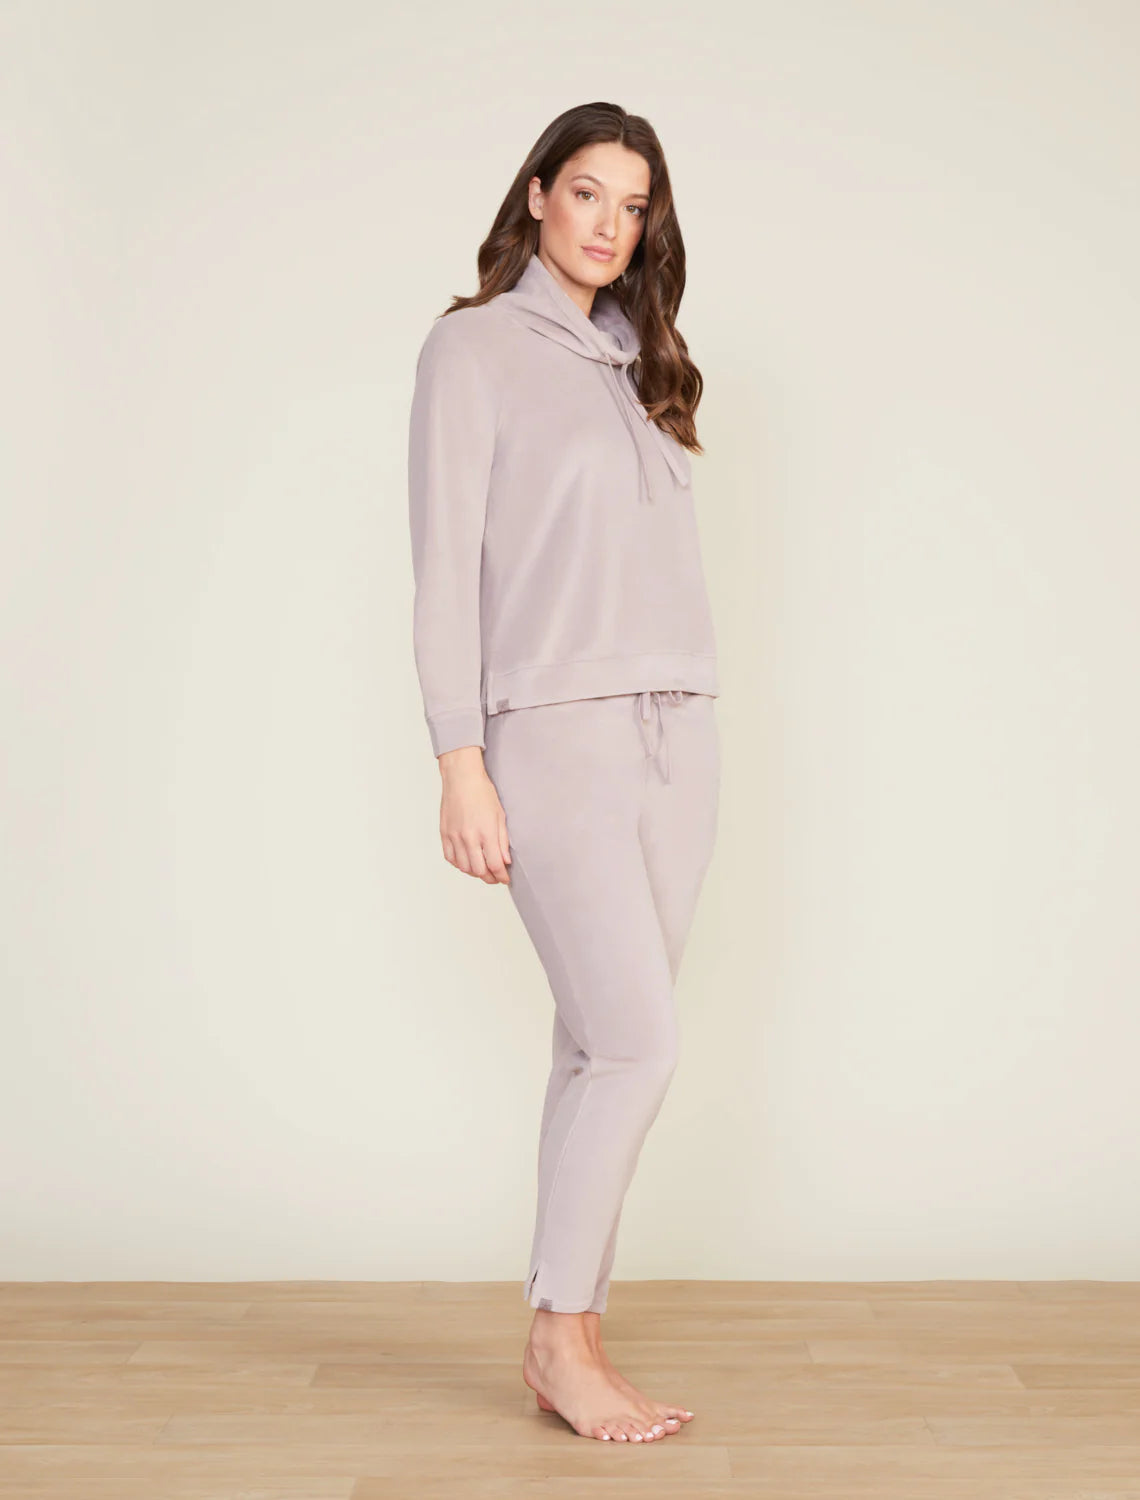 LuxeChic Skinny Pant with Zippers - Deep Taupe